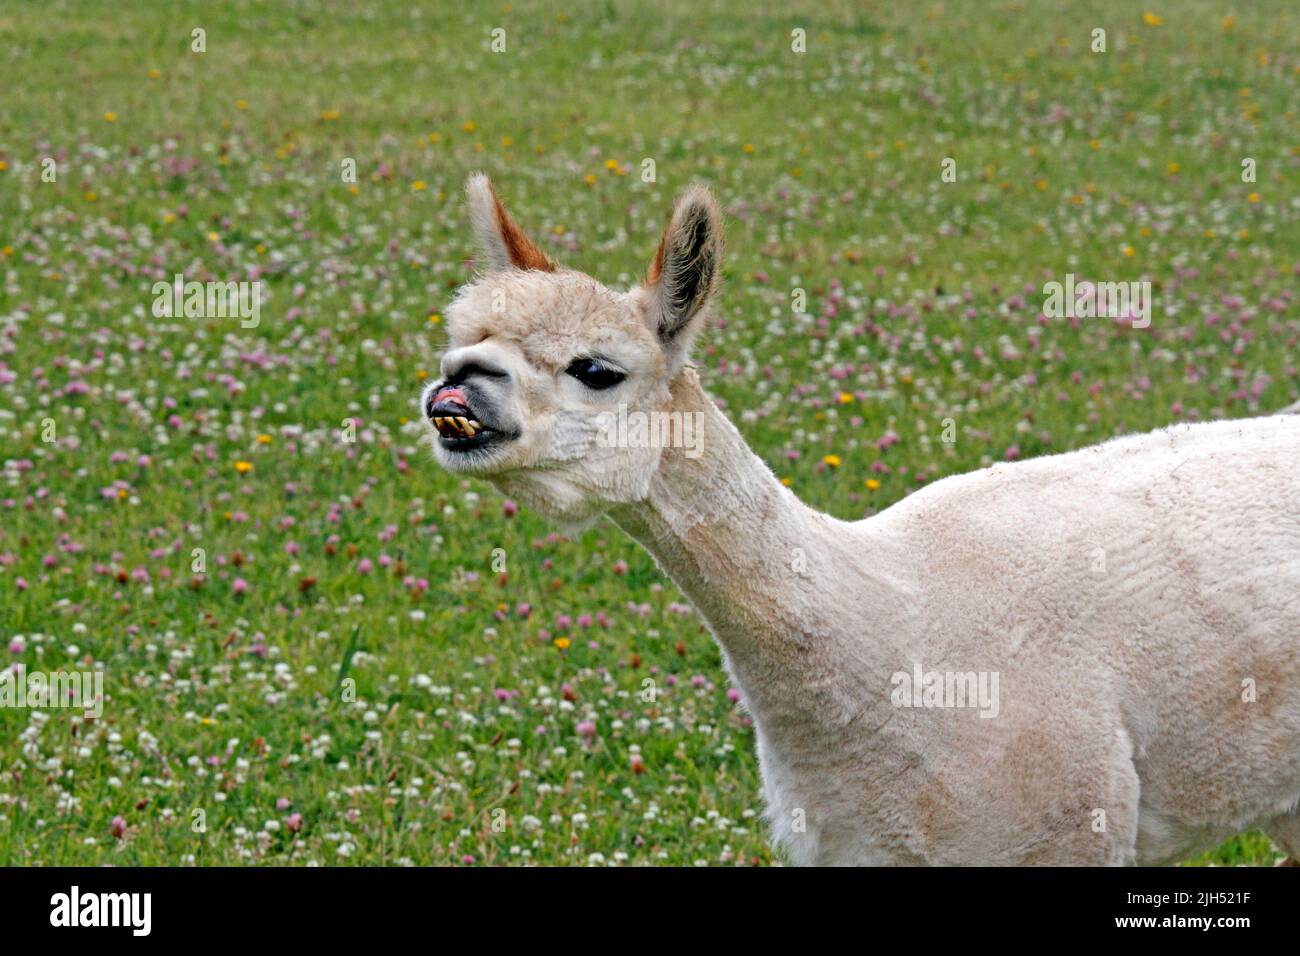 Alpaca, Alpacas, recently groomed, Shawn, sheered. A South American camelid mammal. Stock Photo